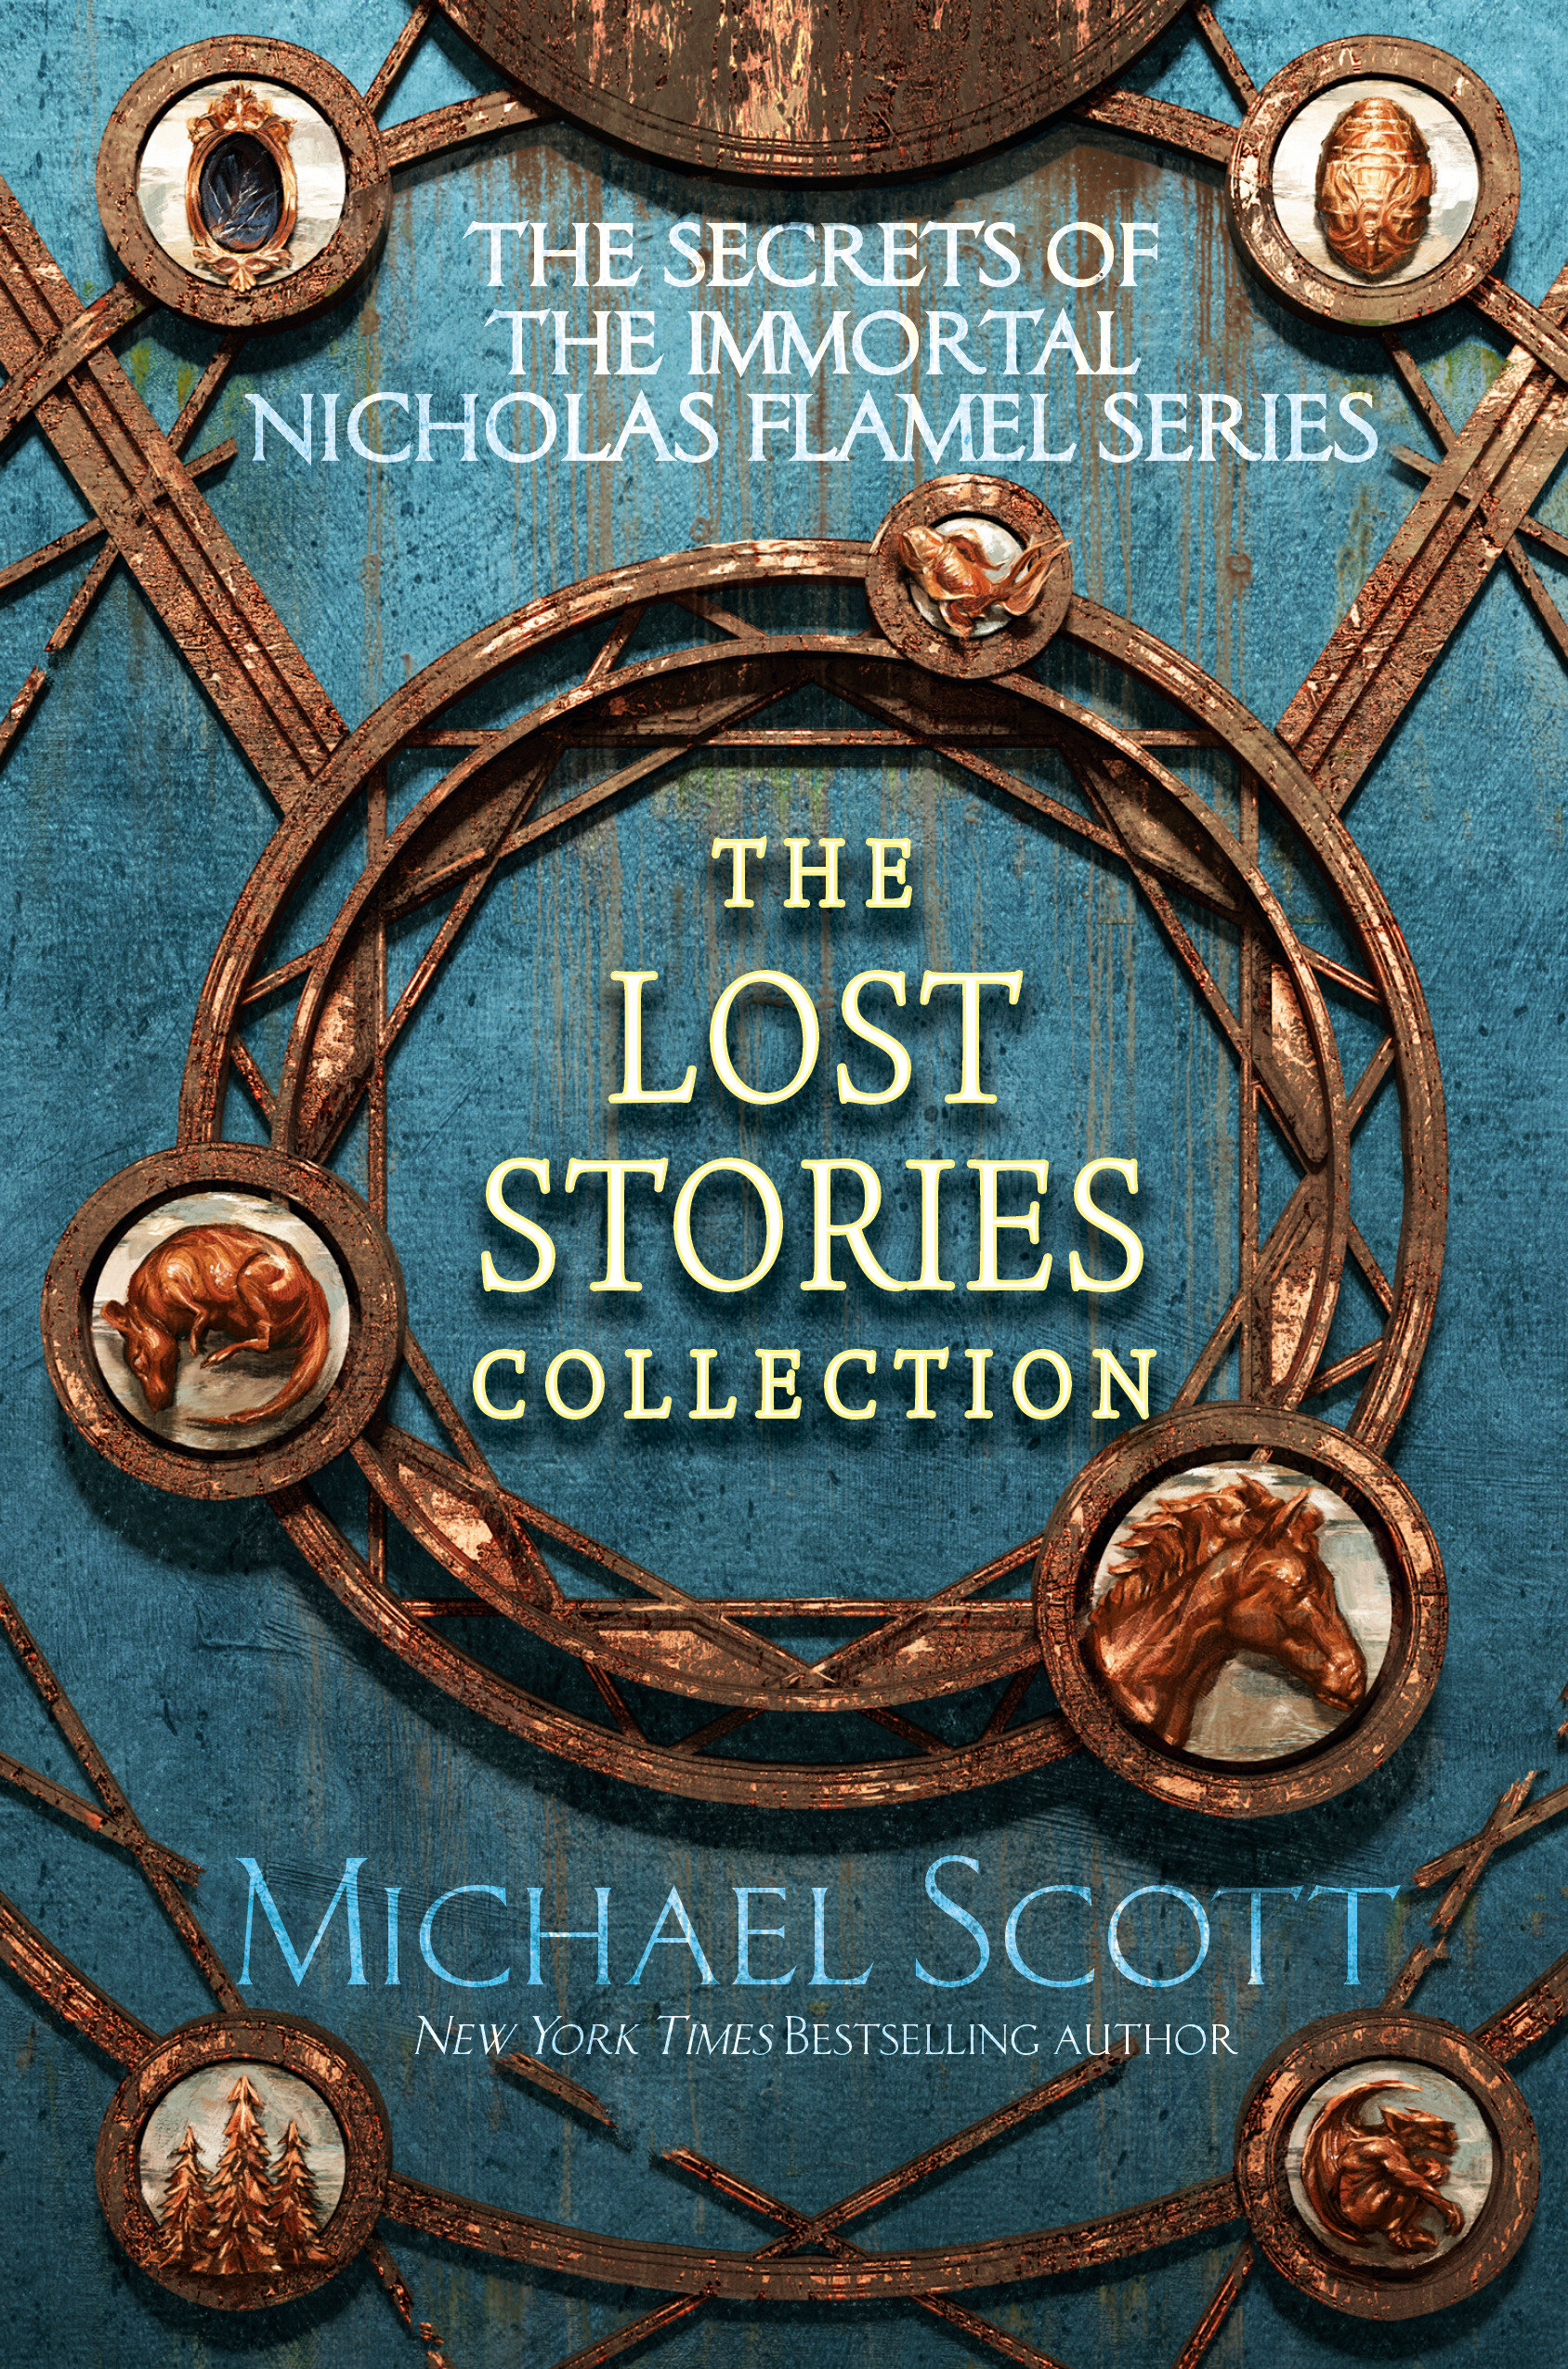 The Secrets Of The Immortal Nicholas Flamel: The Lost Stories Collection (Hardcover Book)